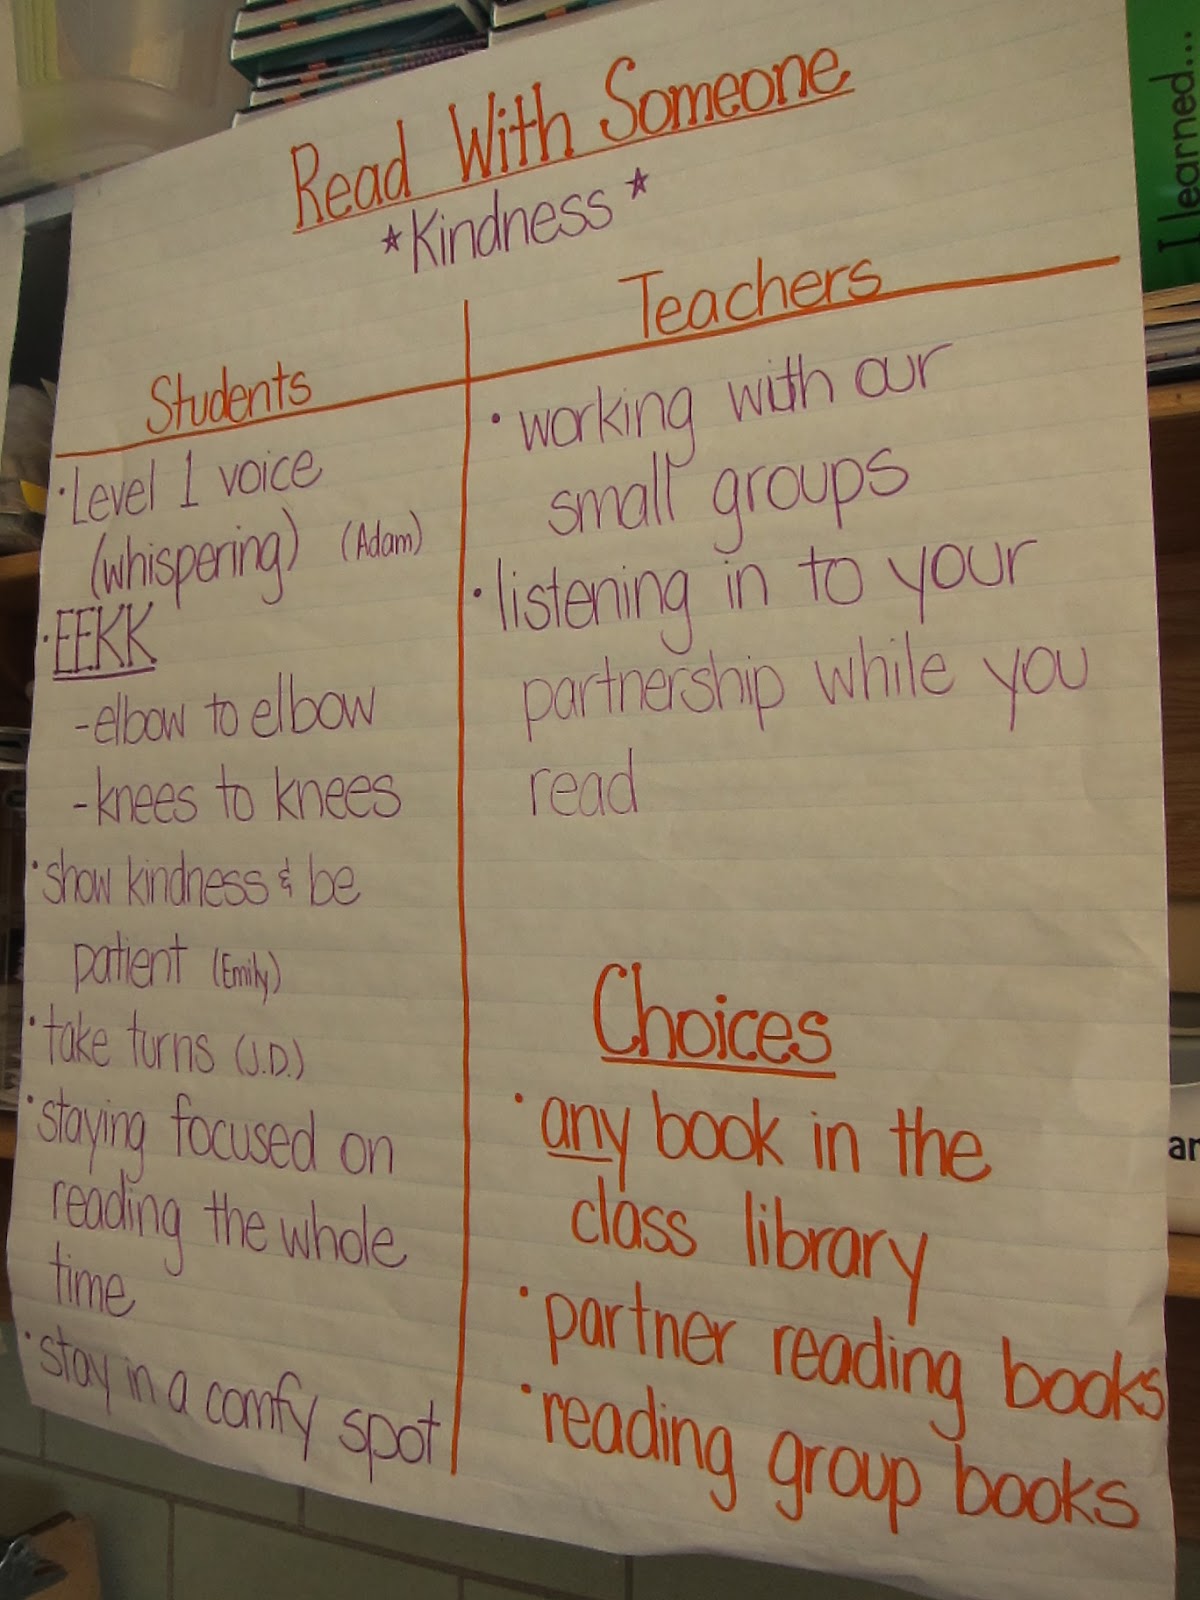 Daily 5 Read To Someone Anchor Chart